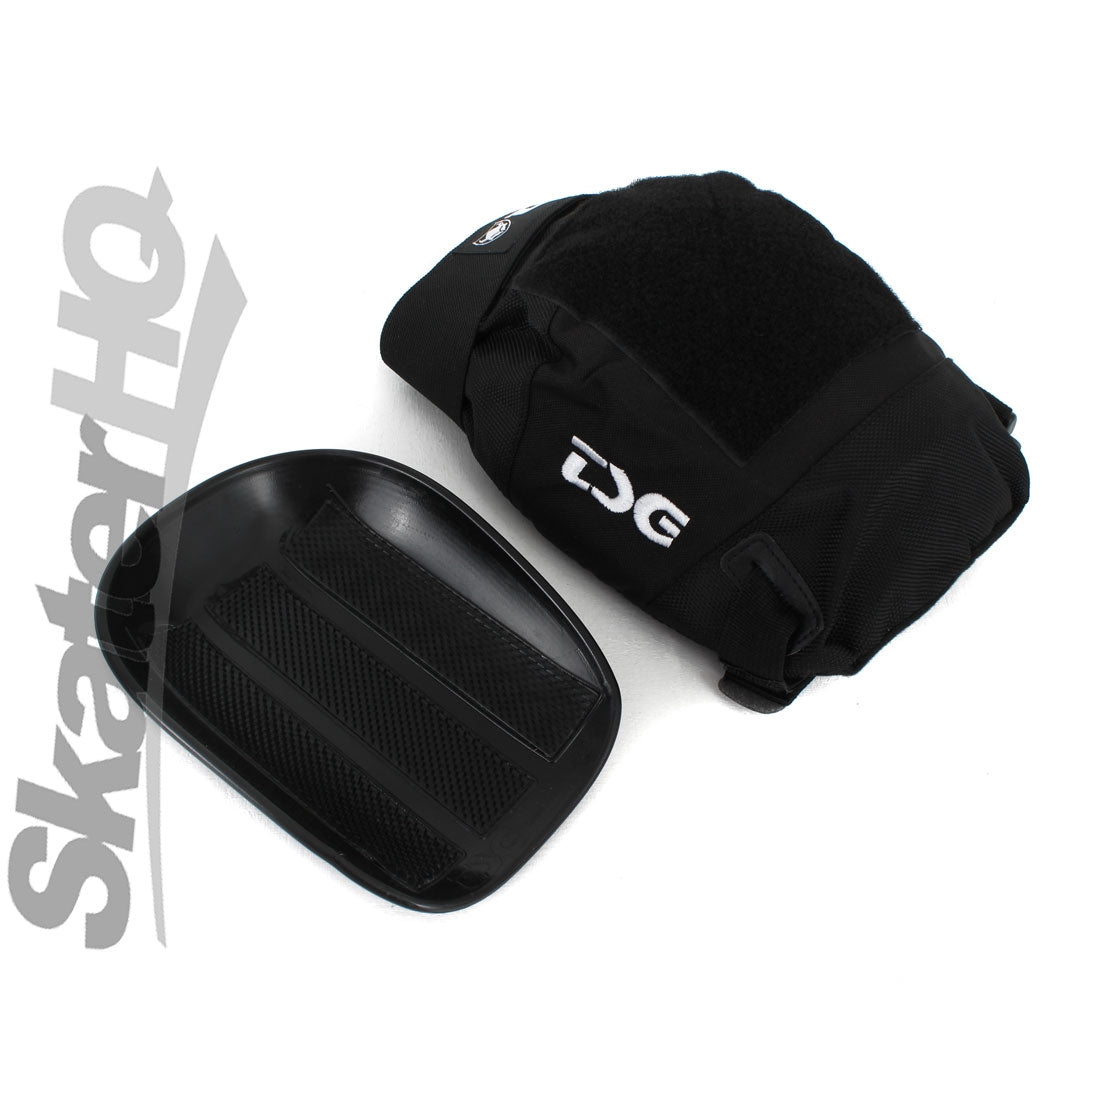 TSG Force V Kneepads - Small Protective Gear